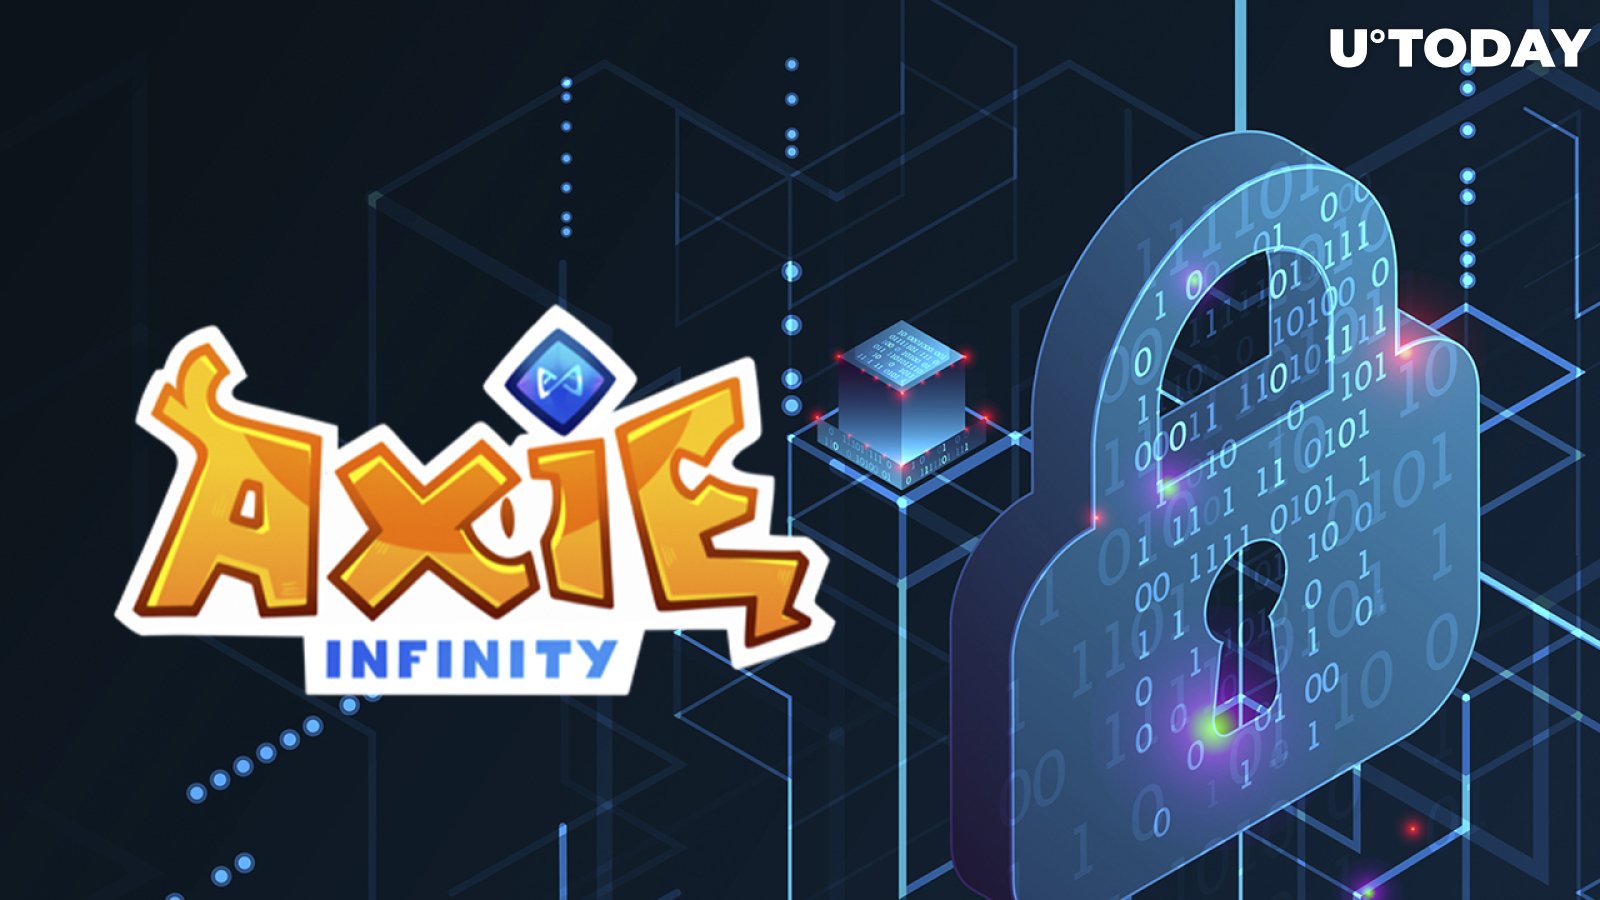 Axie Infinity Owner Promises to Reimburse Players After Massive Hack